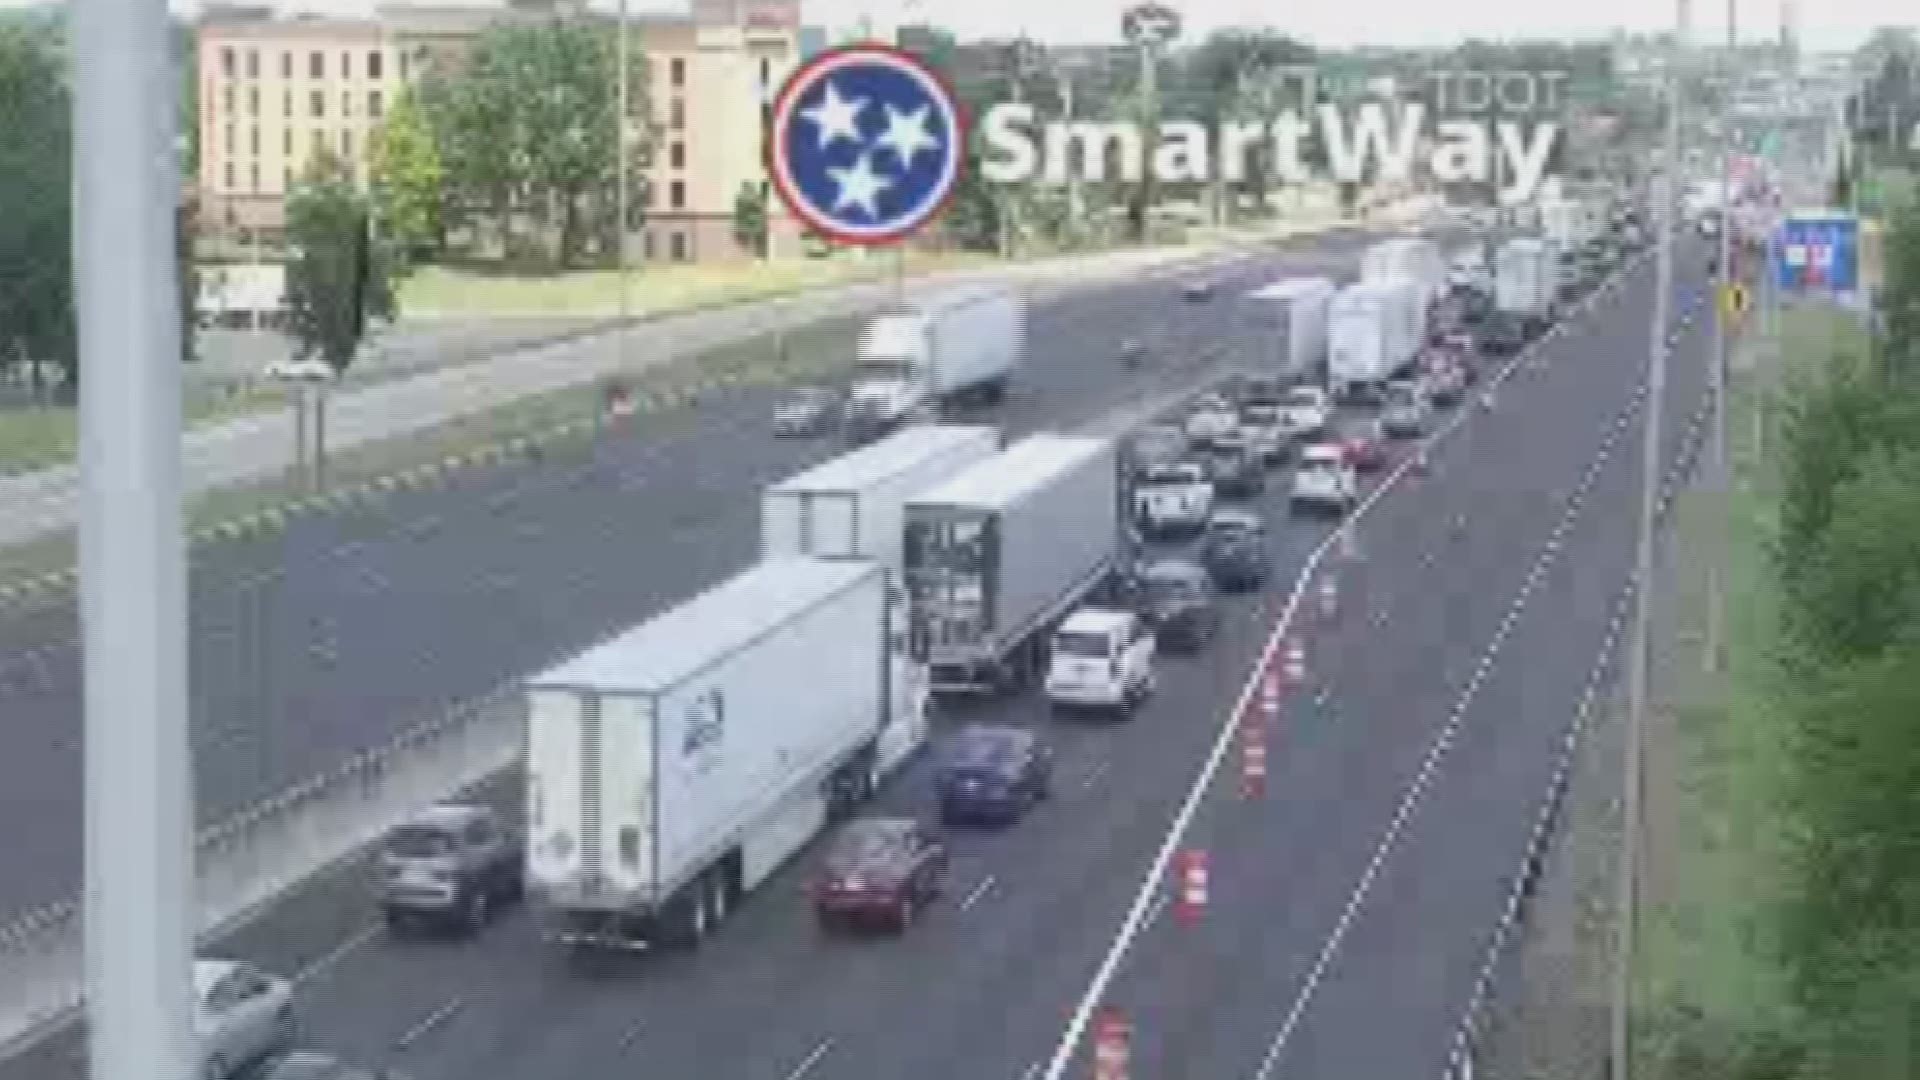 Traffic Delays continue this weekend as bridge work shuts down multiple lanes of I-40